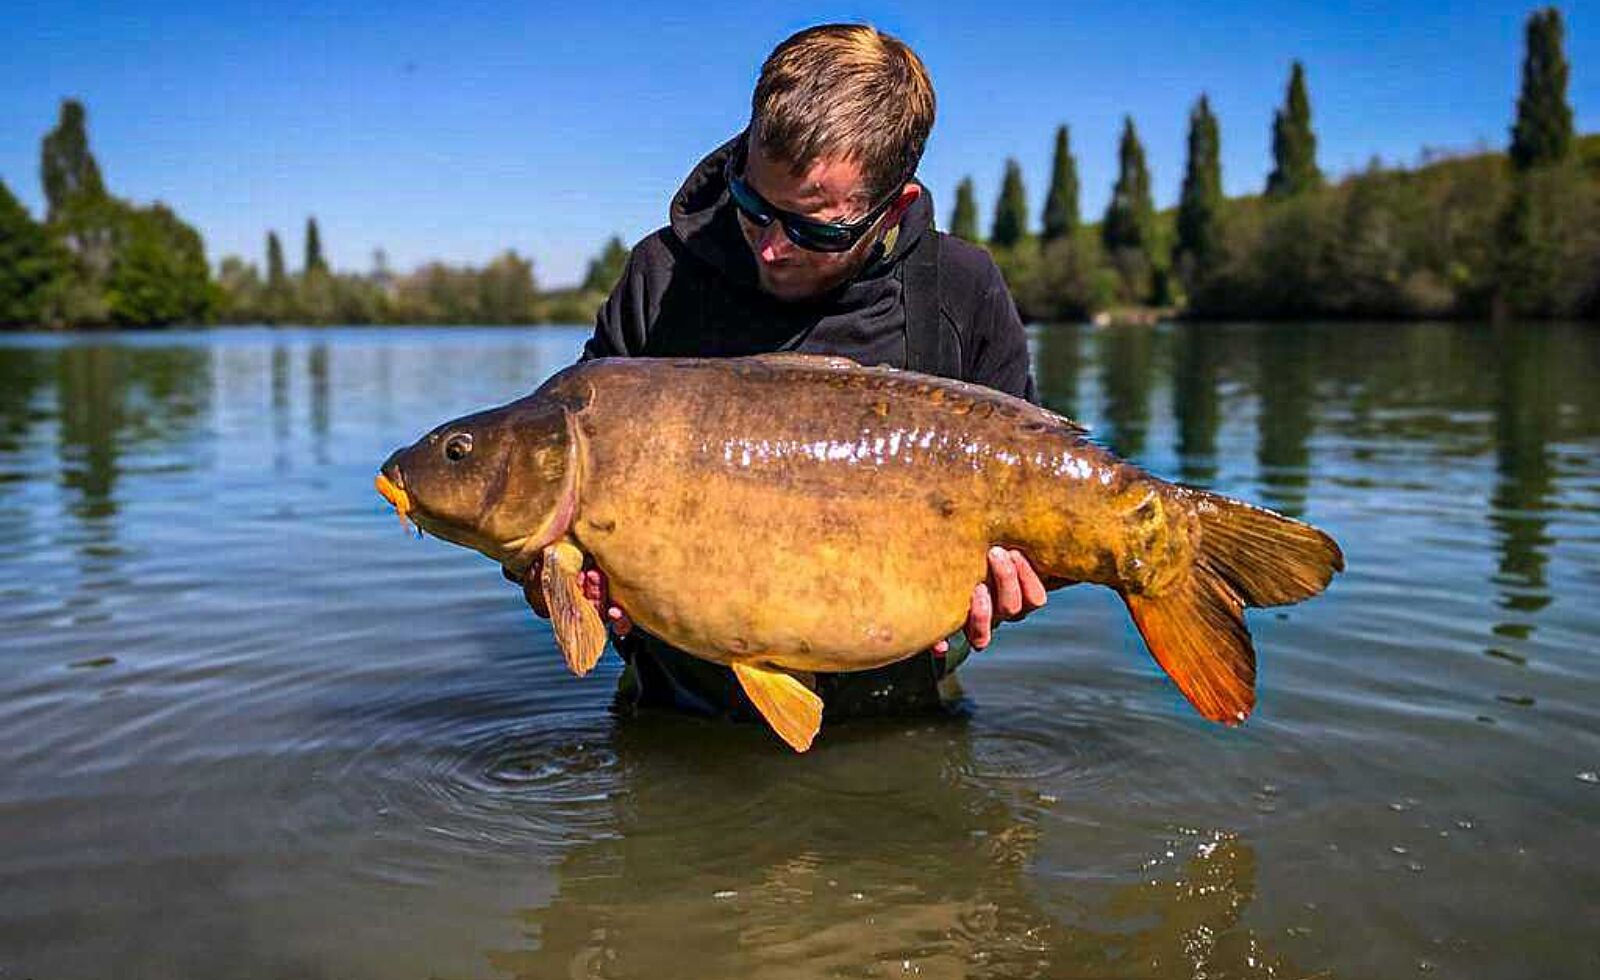 Lac de Grosley France carp fishing holidays with peace of mind